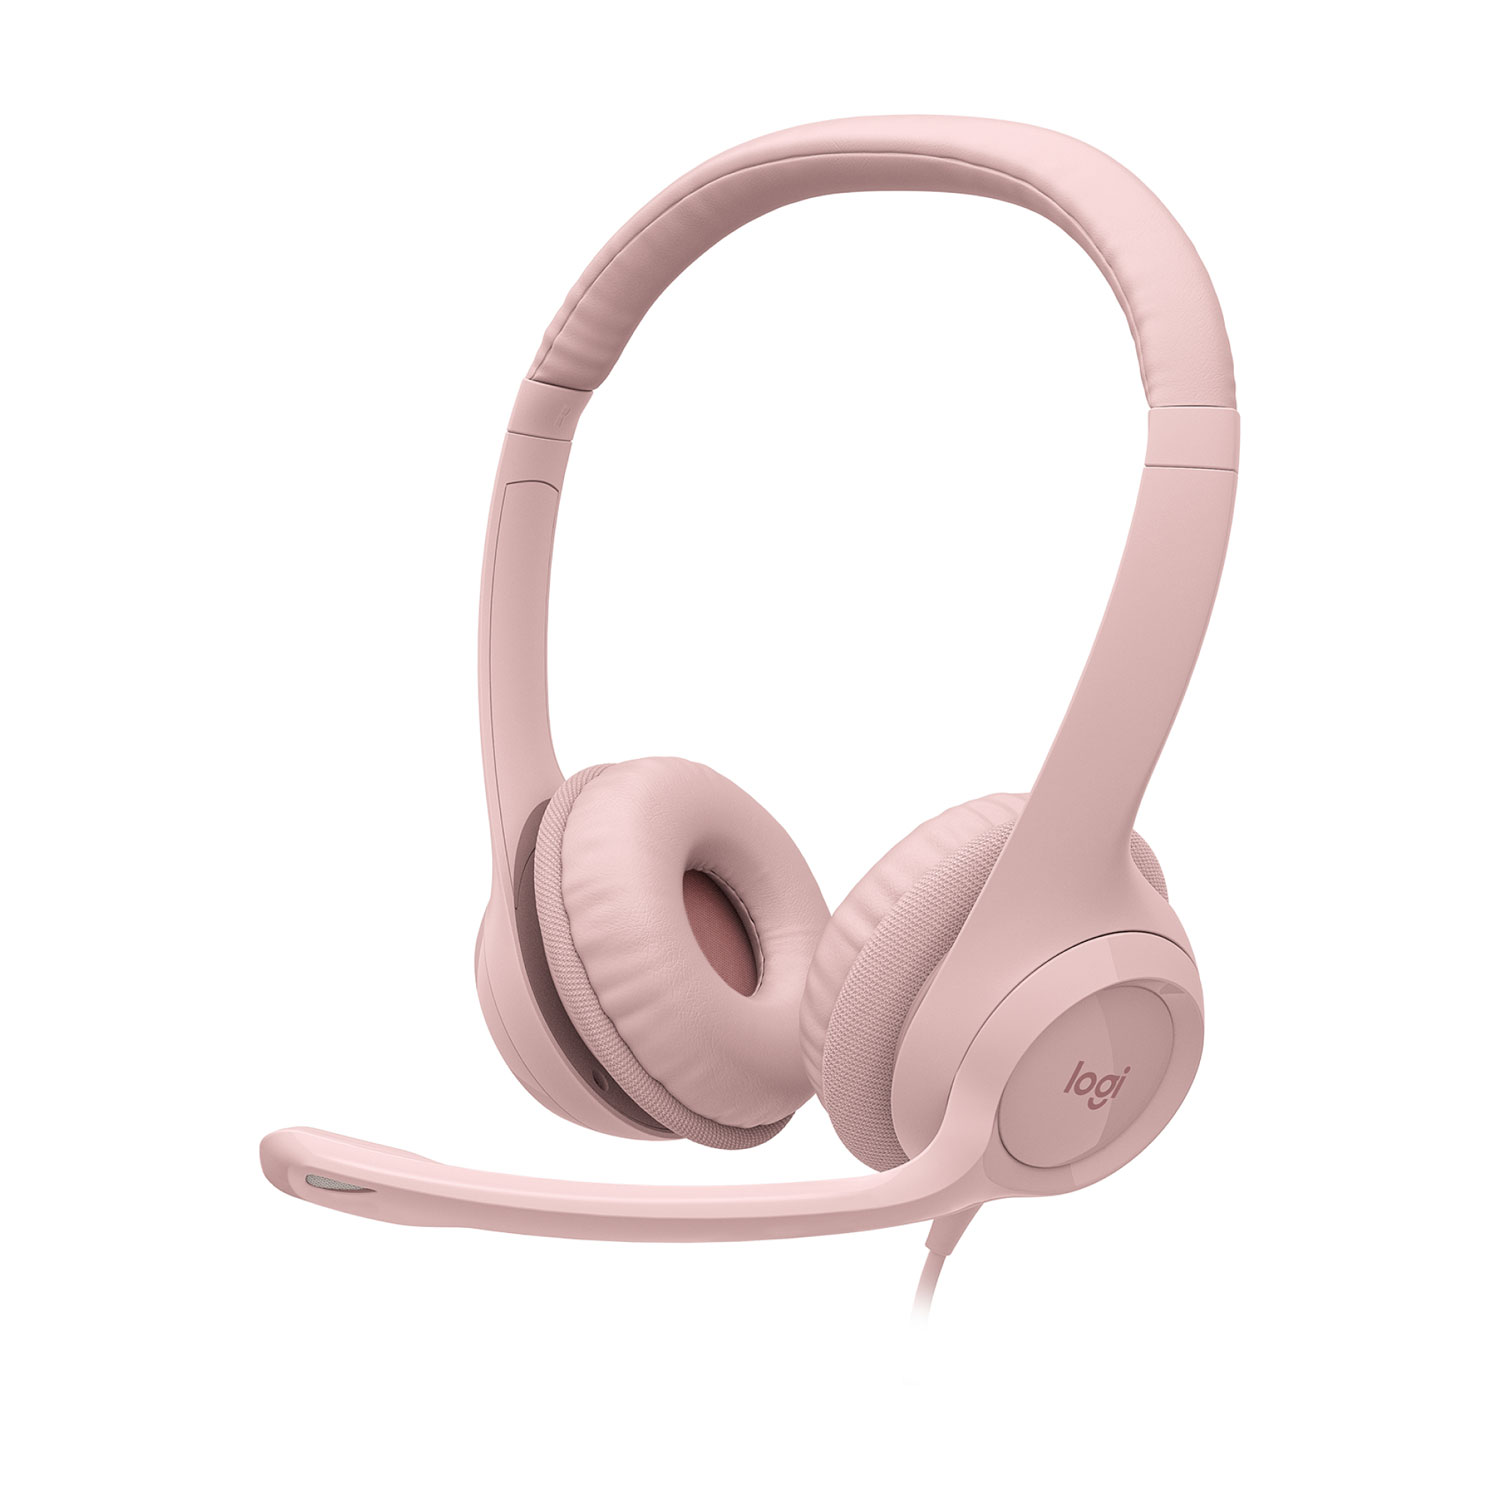 Logitech H390 Wired Headset with Noise Cancelling Microphone - Rose